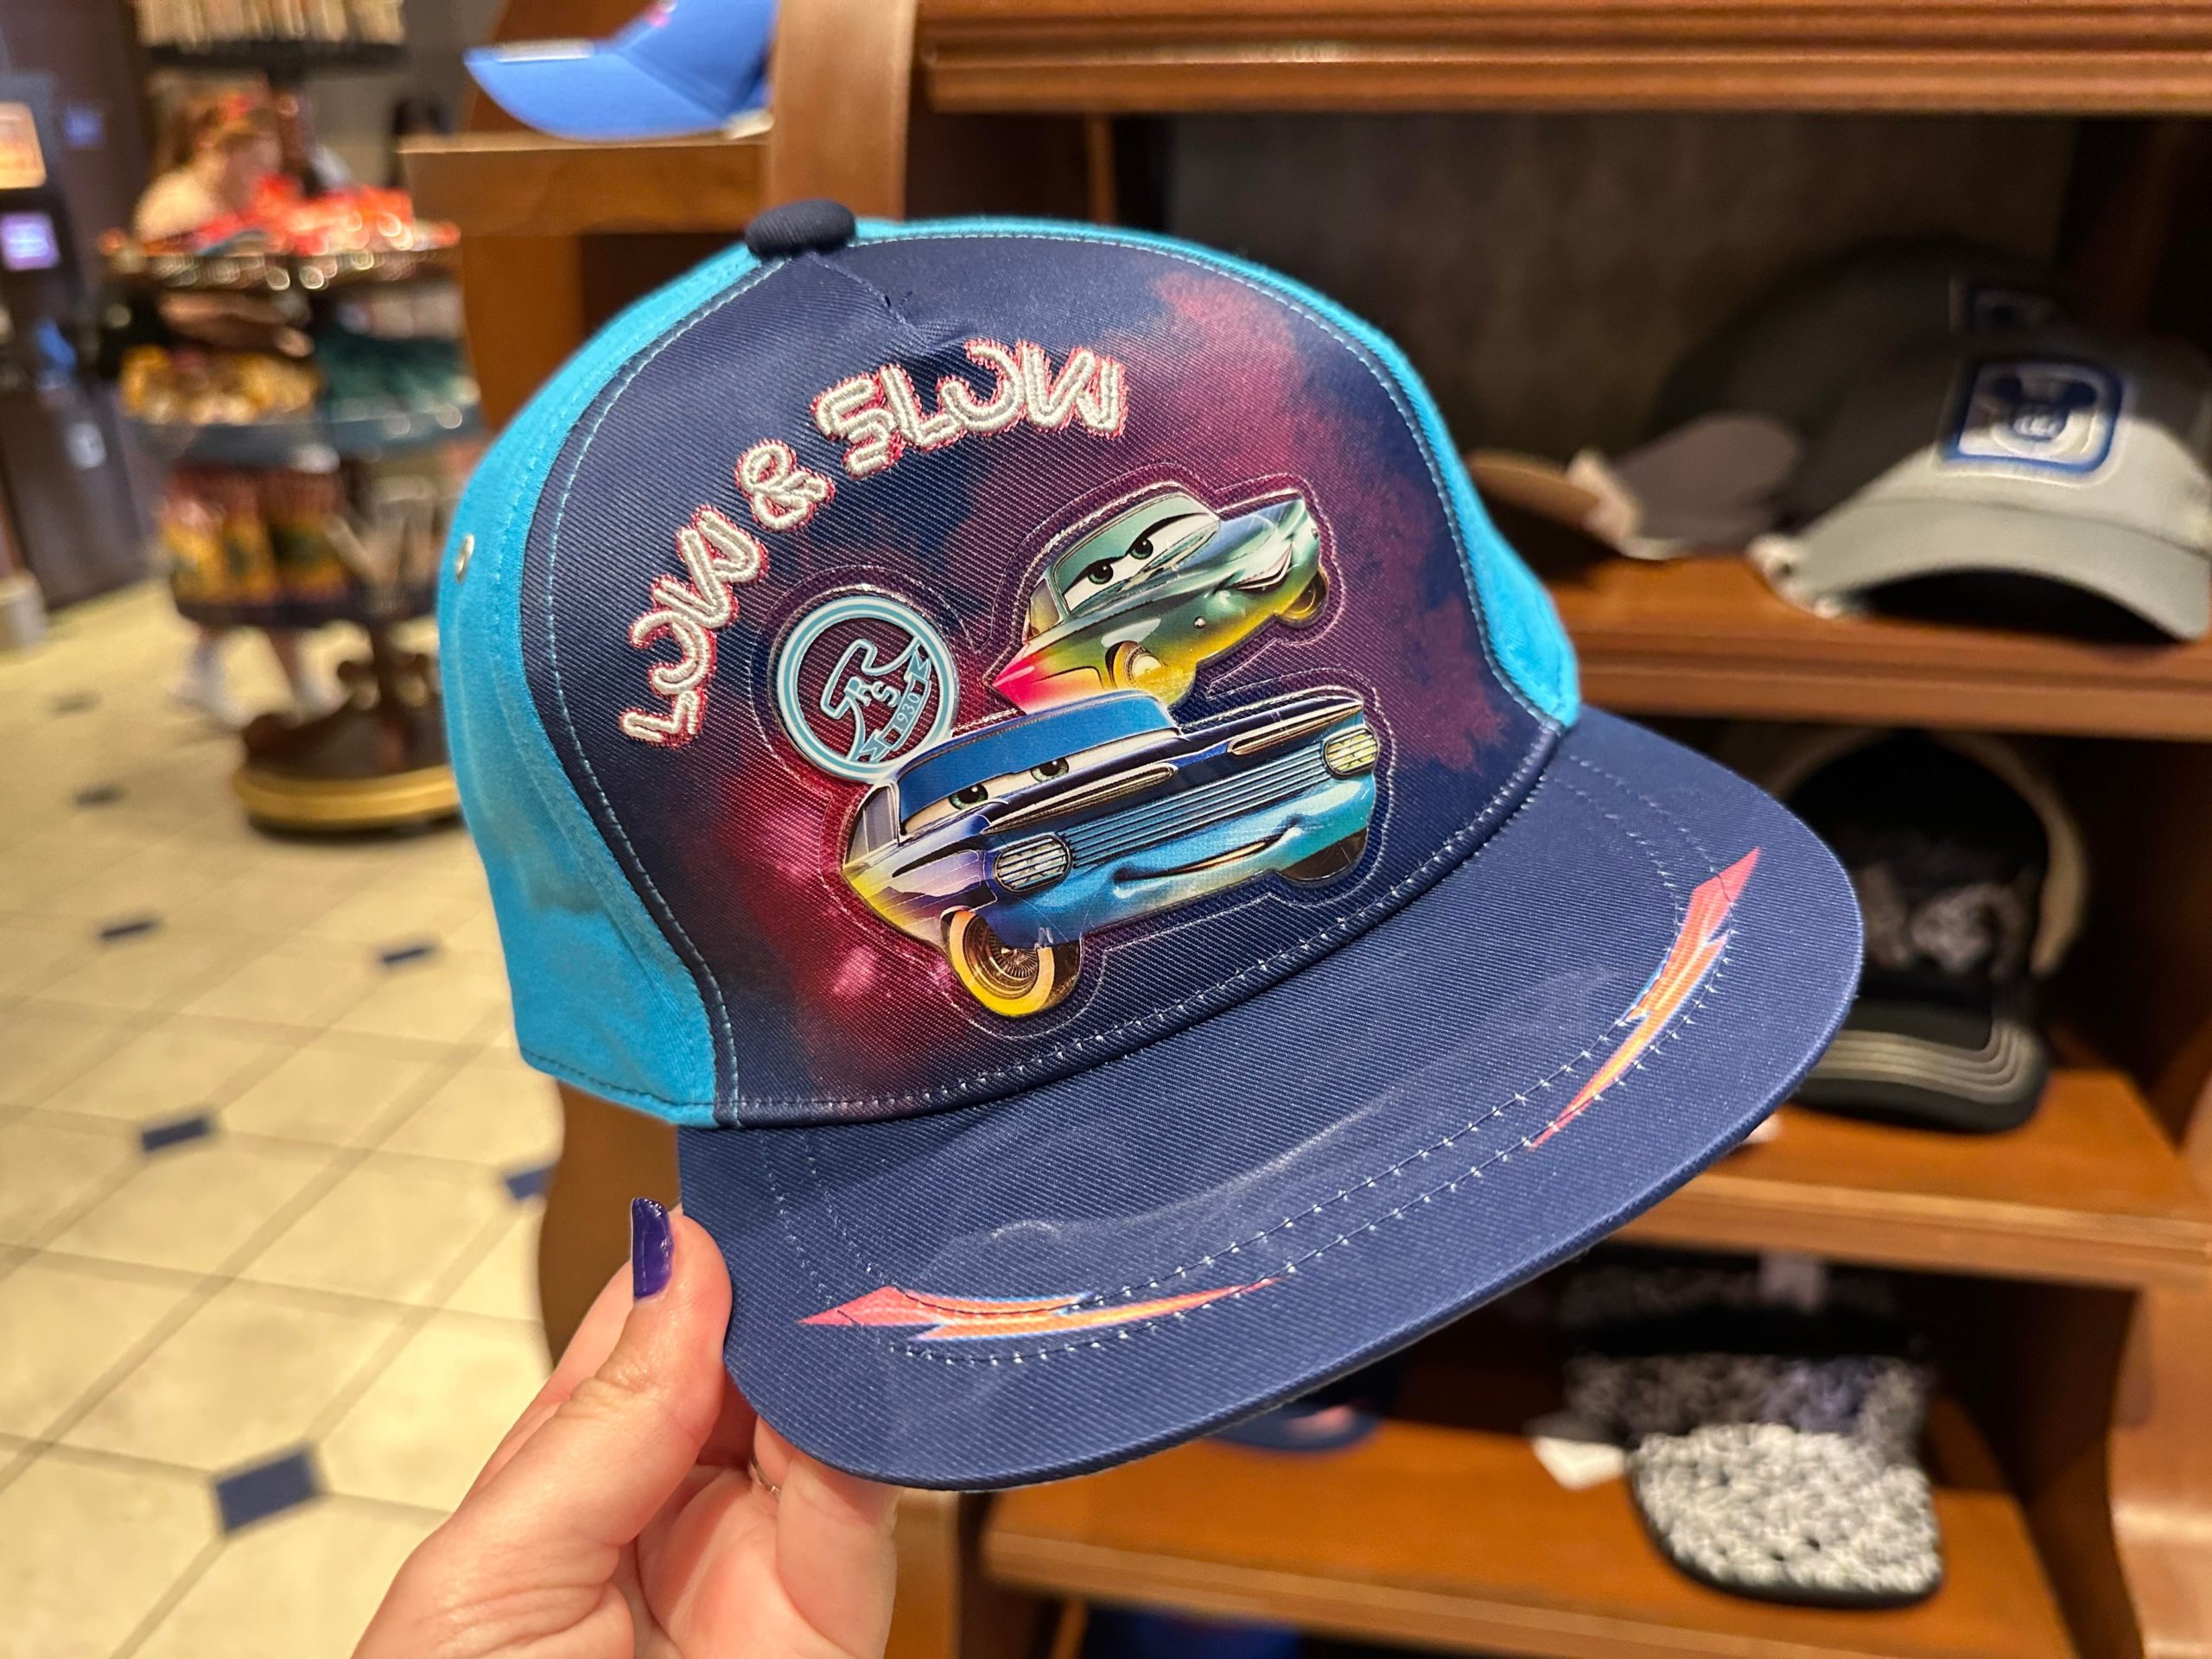 New Cars Hat Zooms Into Fantasy Faire 